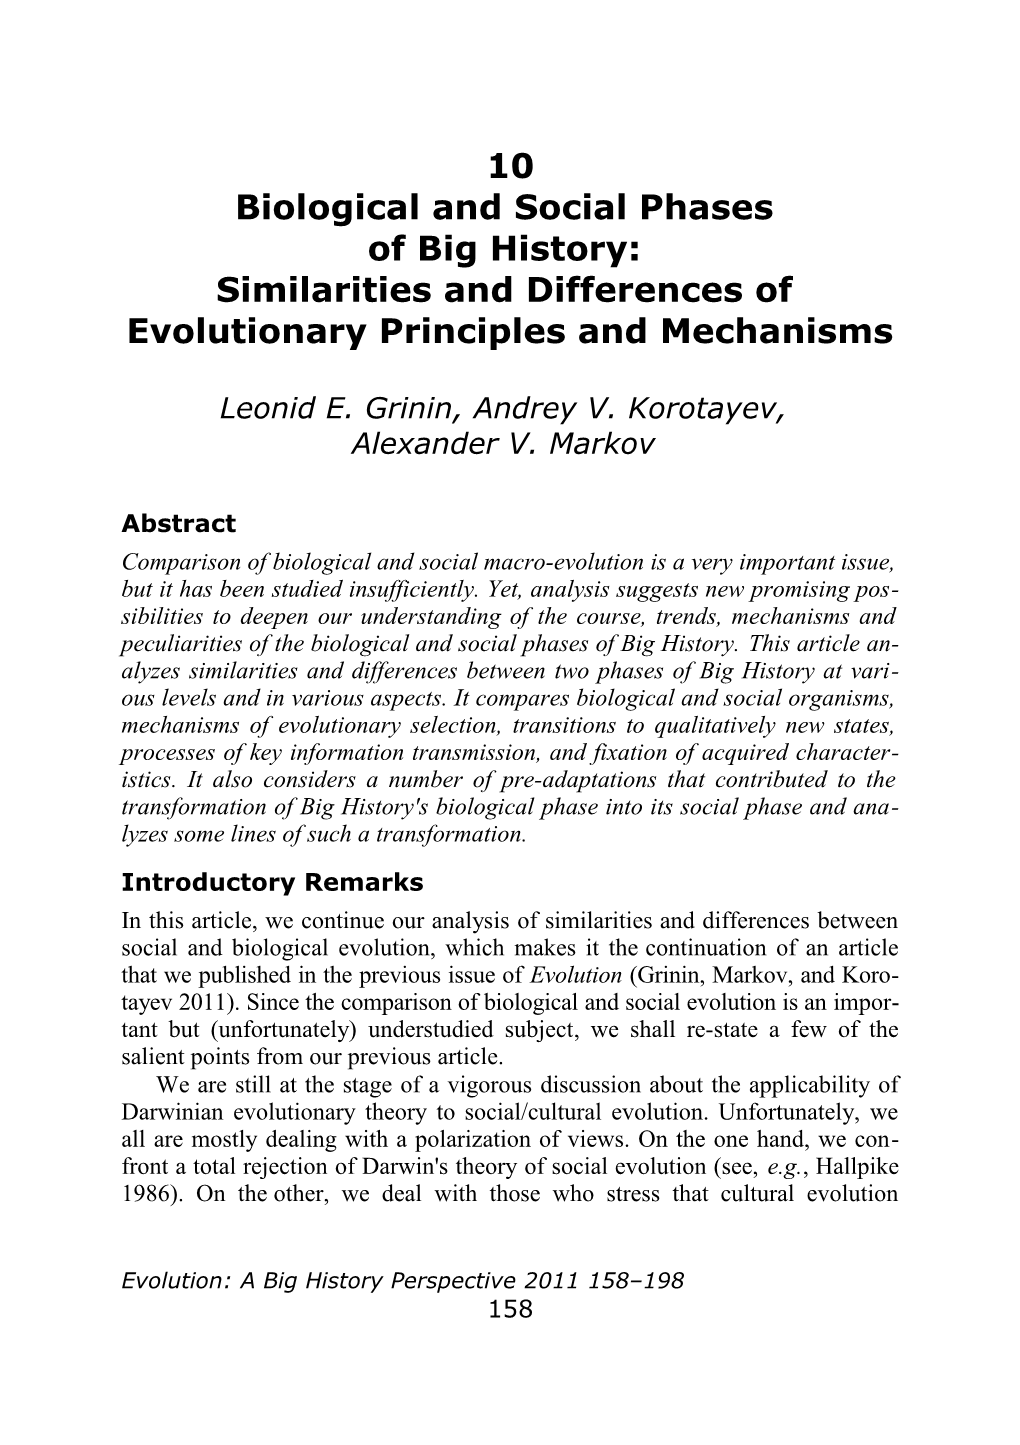 Biological and Social Phases of Big History